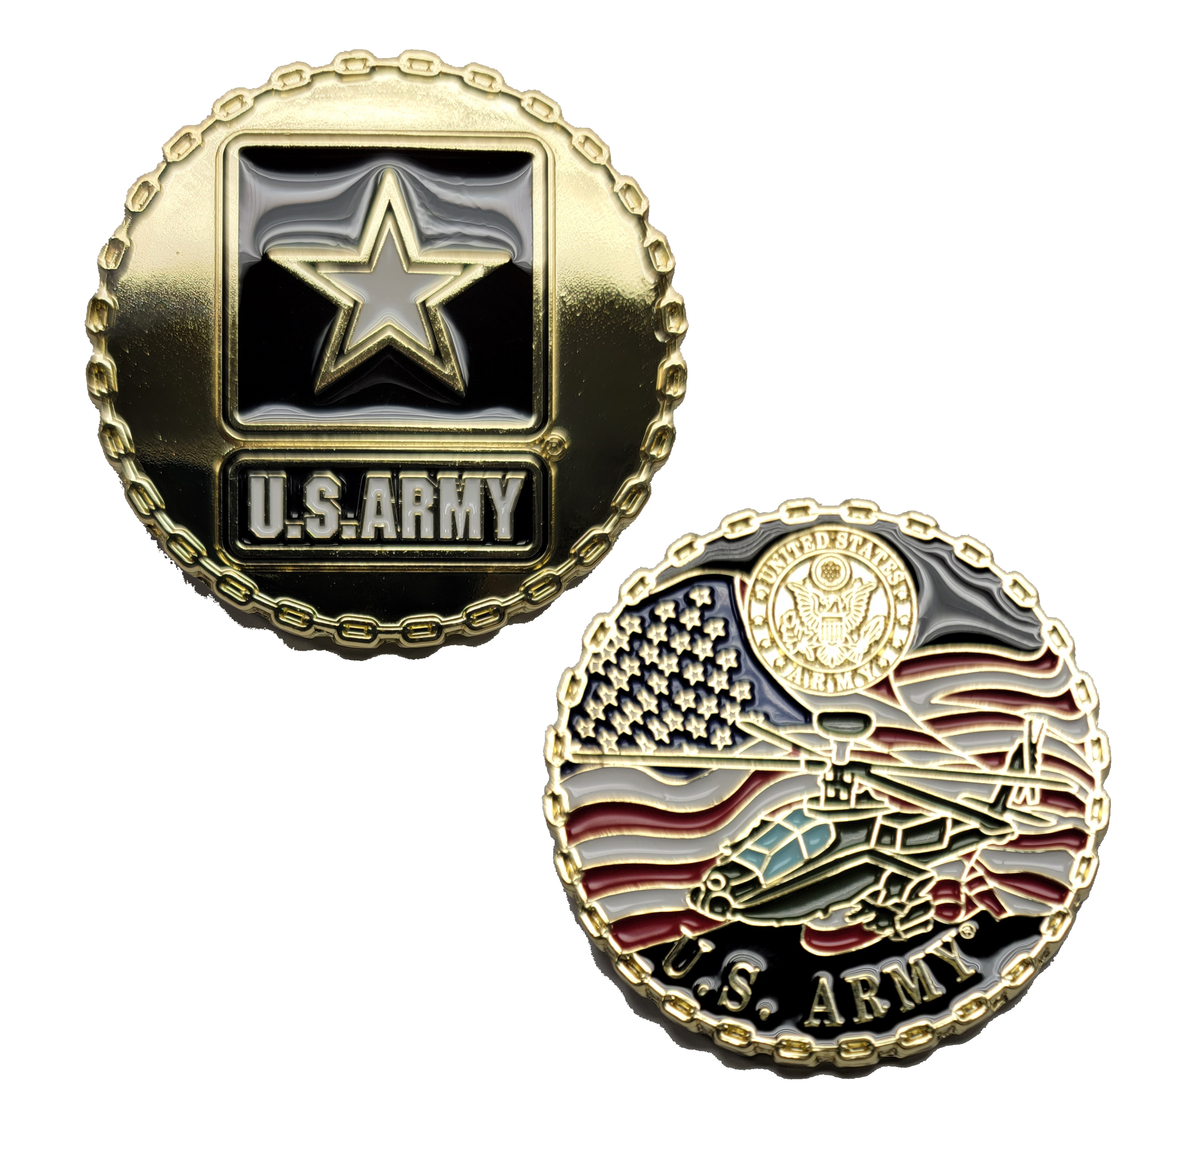 U.S. Army Challenge Coin with Army Star and Helicopter